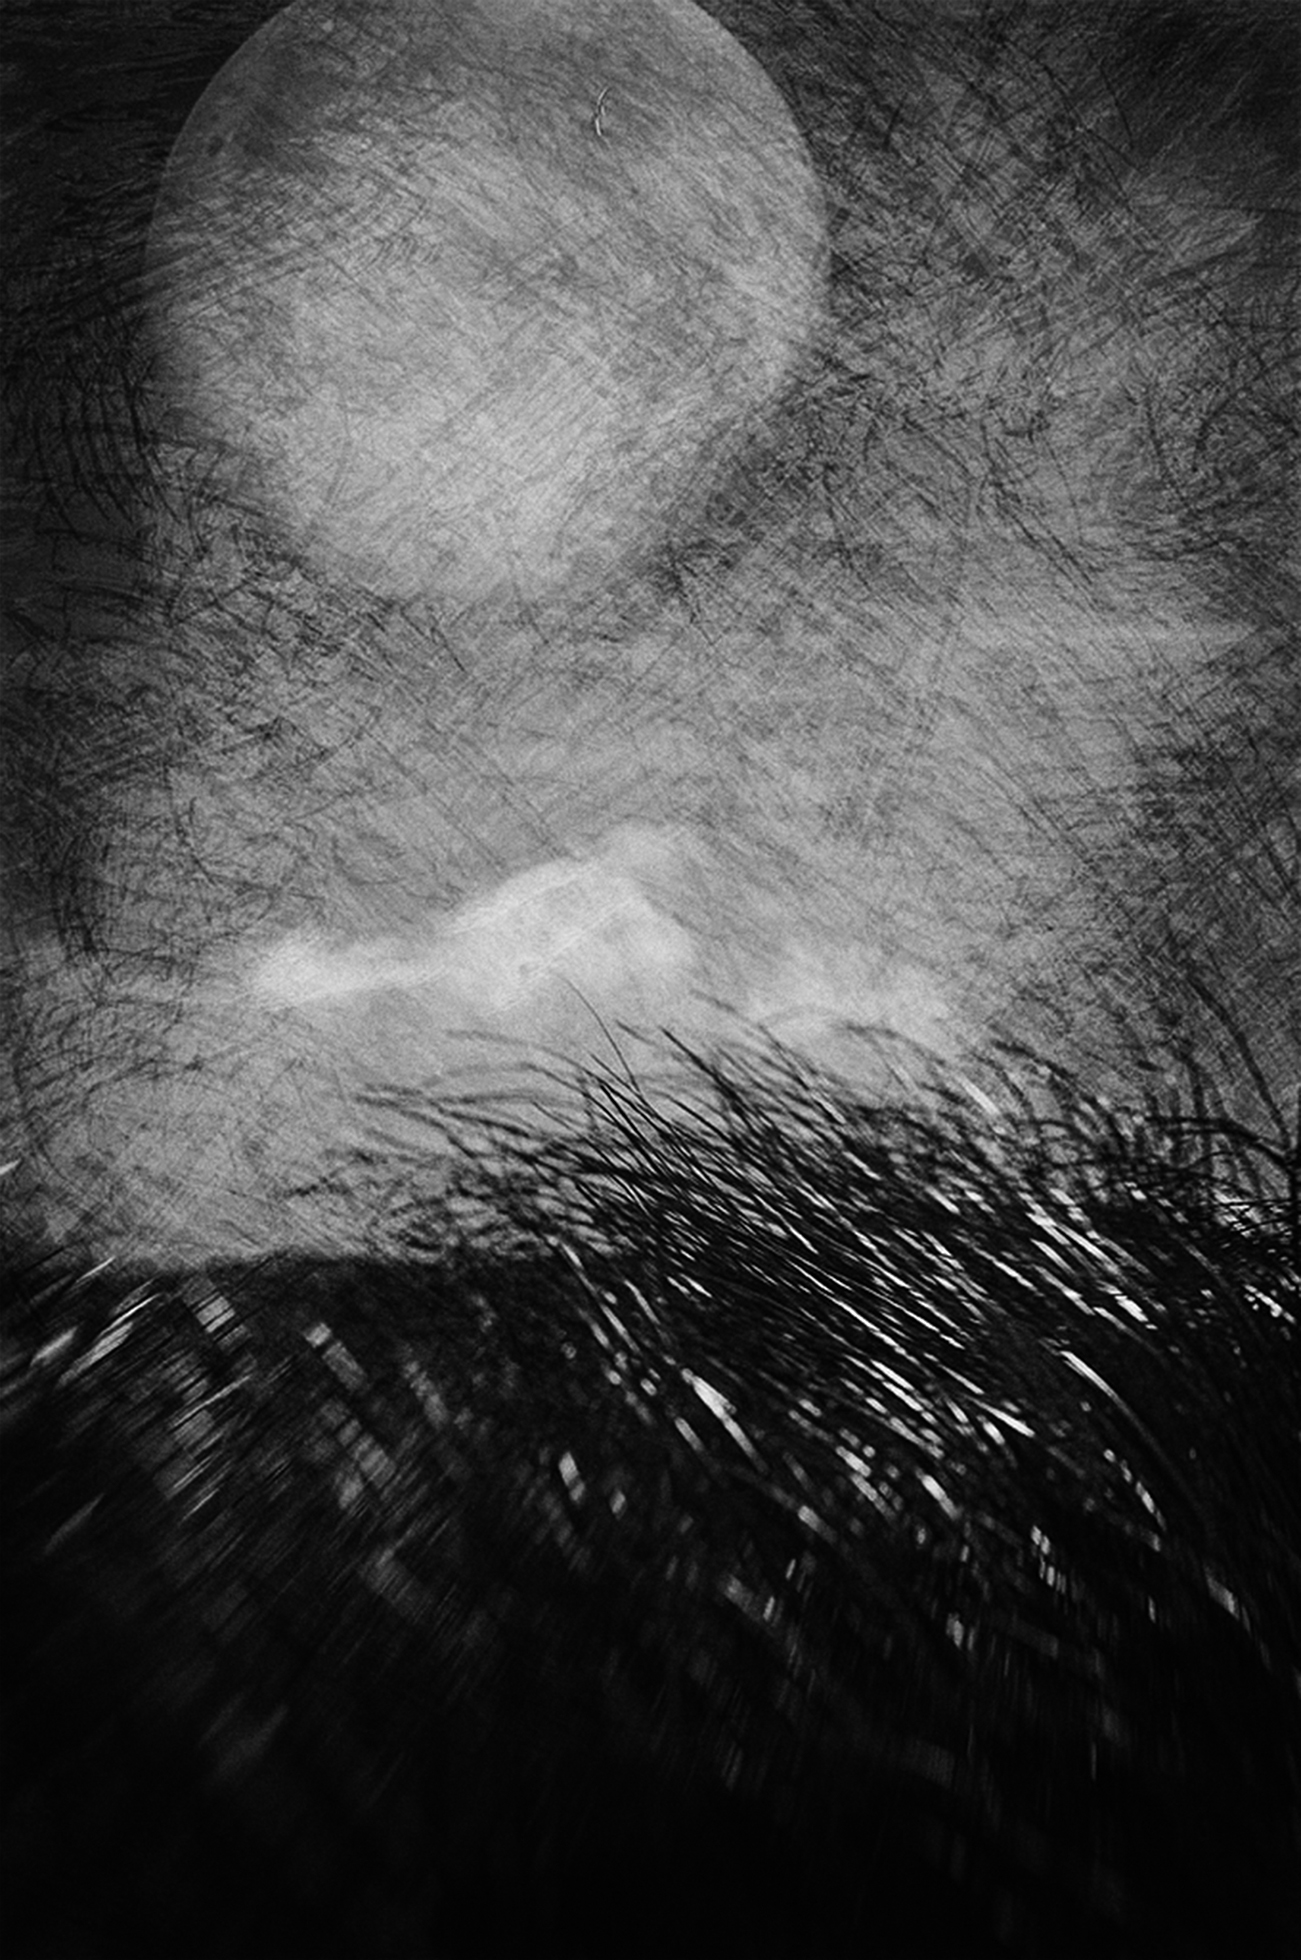 Tall winter grasses appear to move against the night sky: a few clouds insignificant next to the large moon. The image is fully crosshatched and textured lending an otherworldly quality to this darkened landscape.